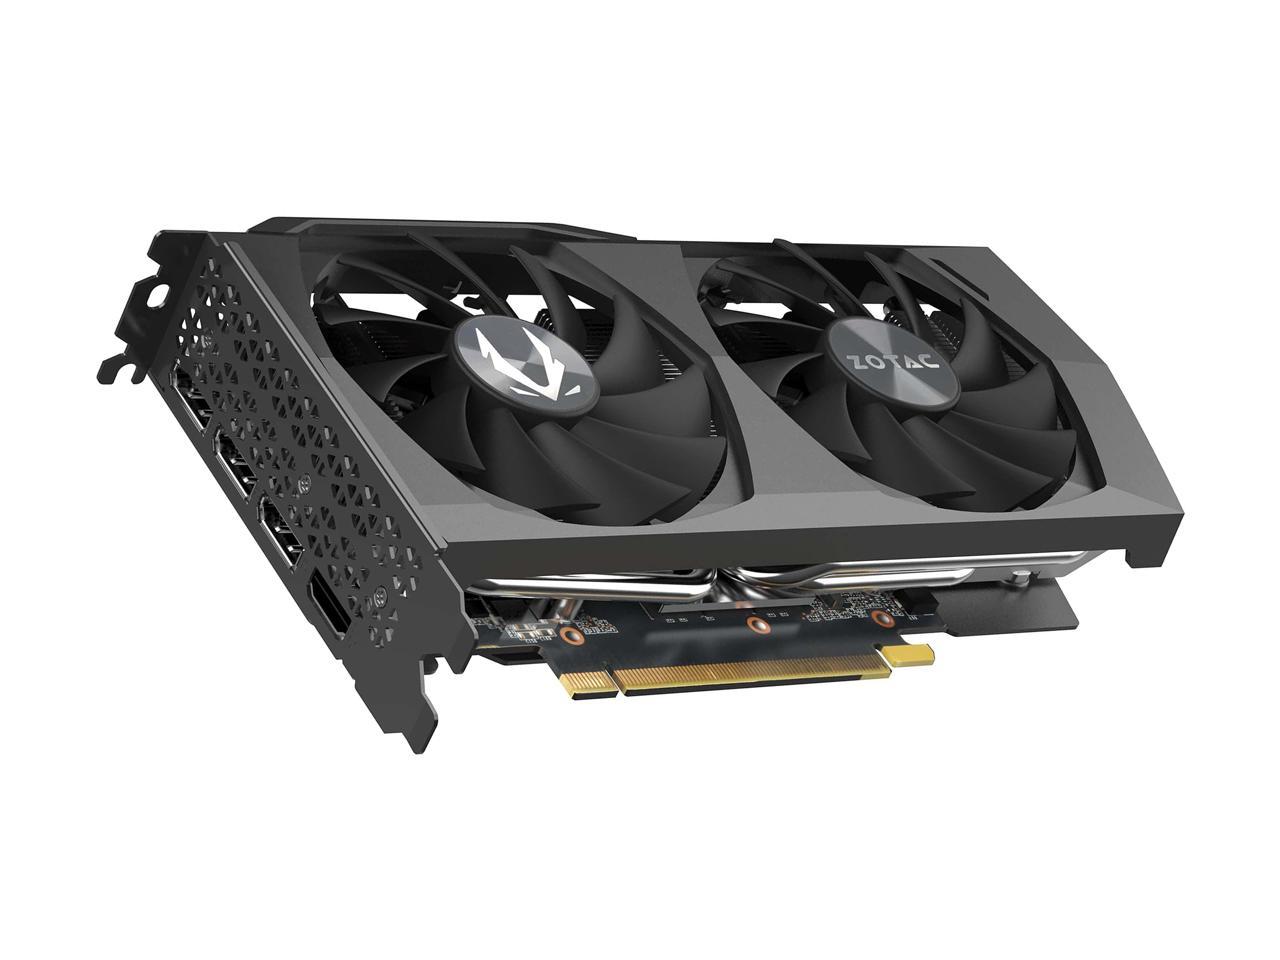 ZOTAC GAMING GeForce RTX 3060 Twin Edge 12GB GDDR6 192-bit 15 Gbps PCIE 4.0  Gaming Graphics Card, IceStorm 2.0 Cooling, Active Fan Control, FREEZE Fan  